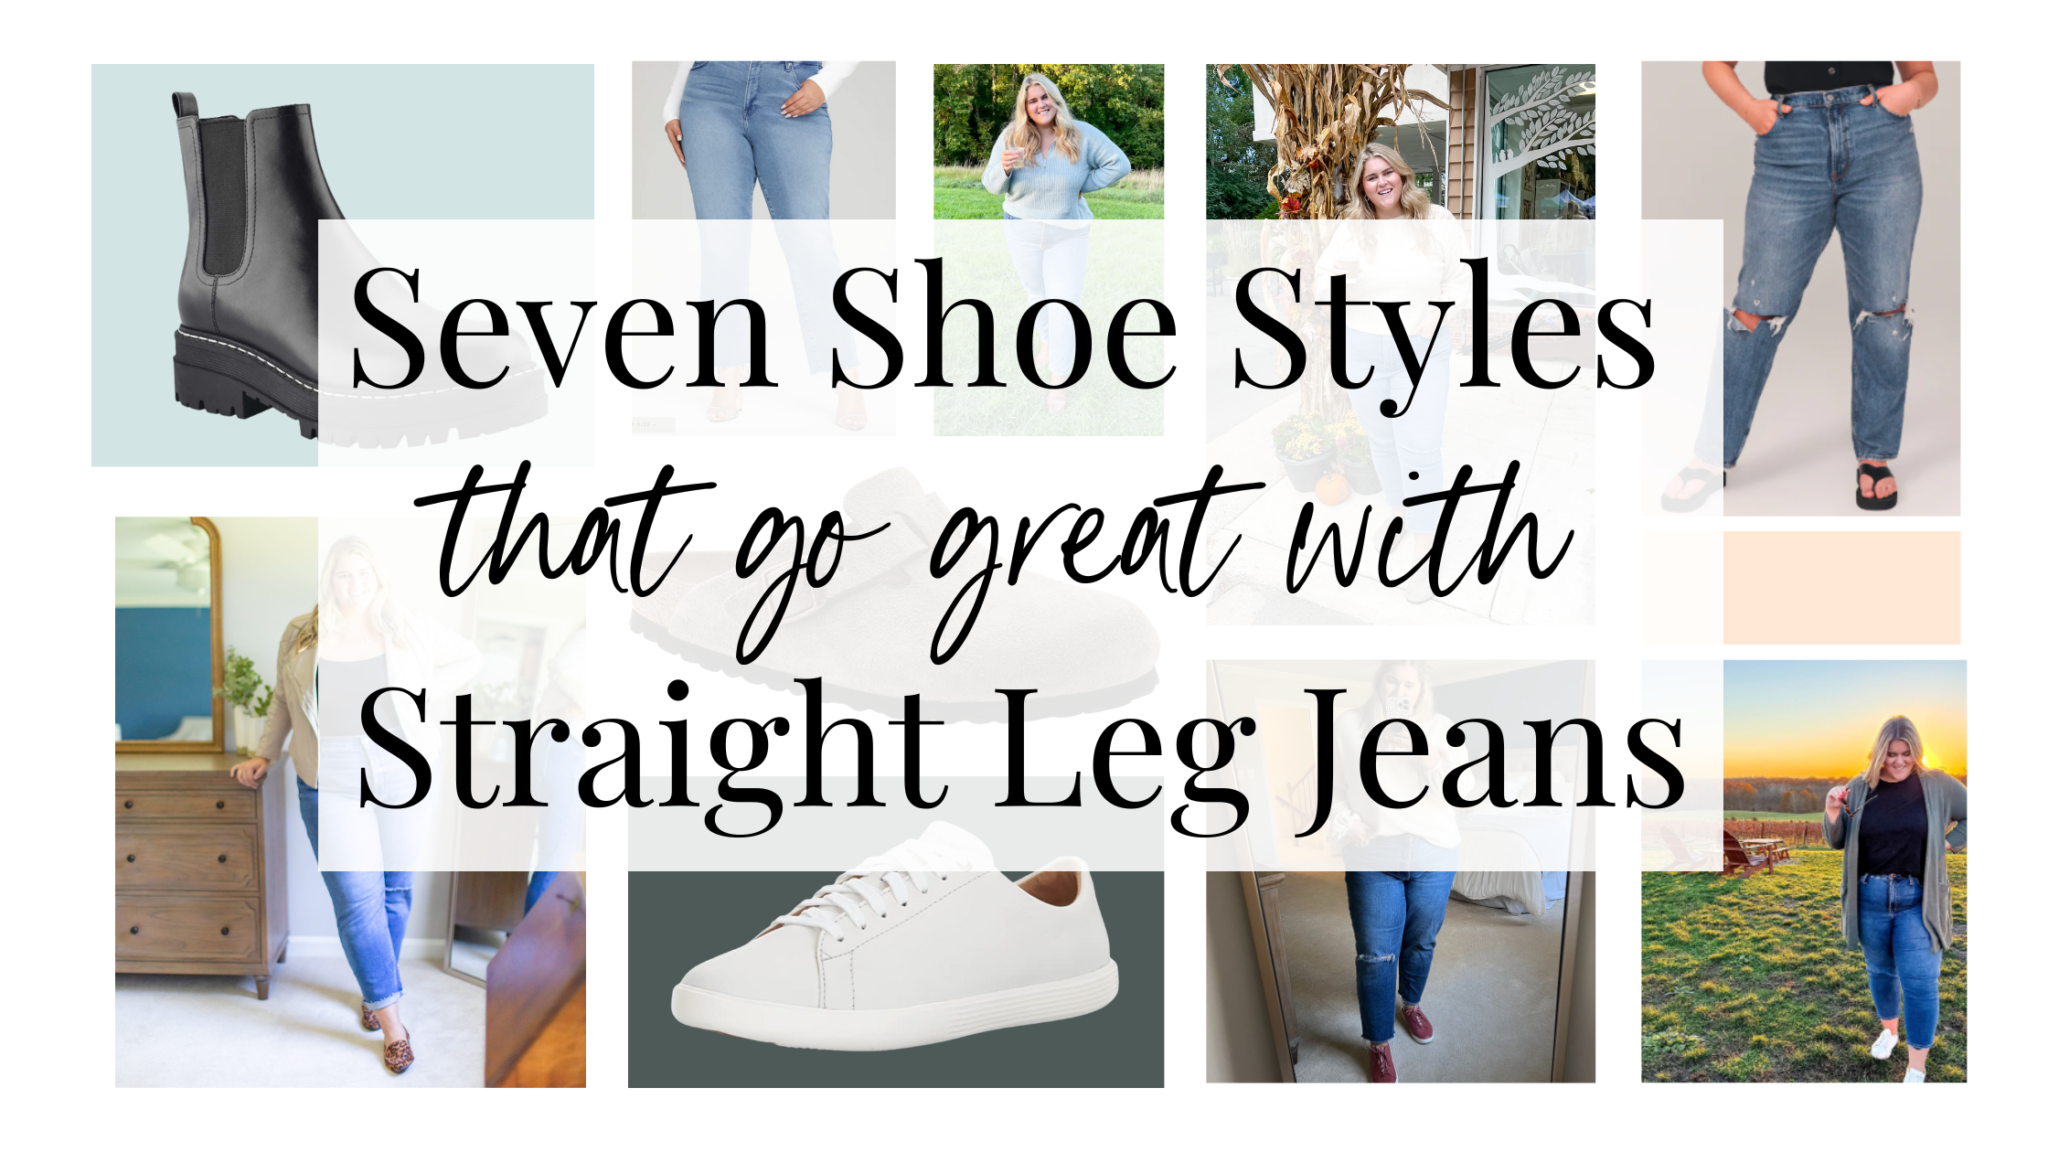 7 Ways to Wear Shoes With Straight Leg Jeans - www.carlakiley.com